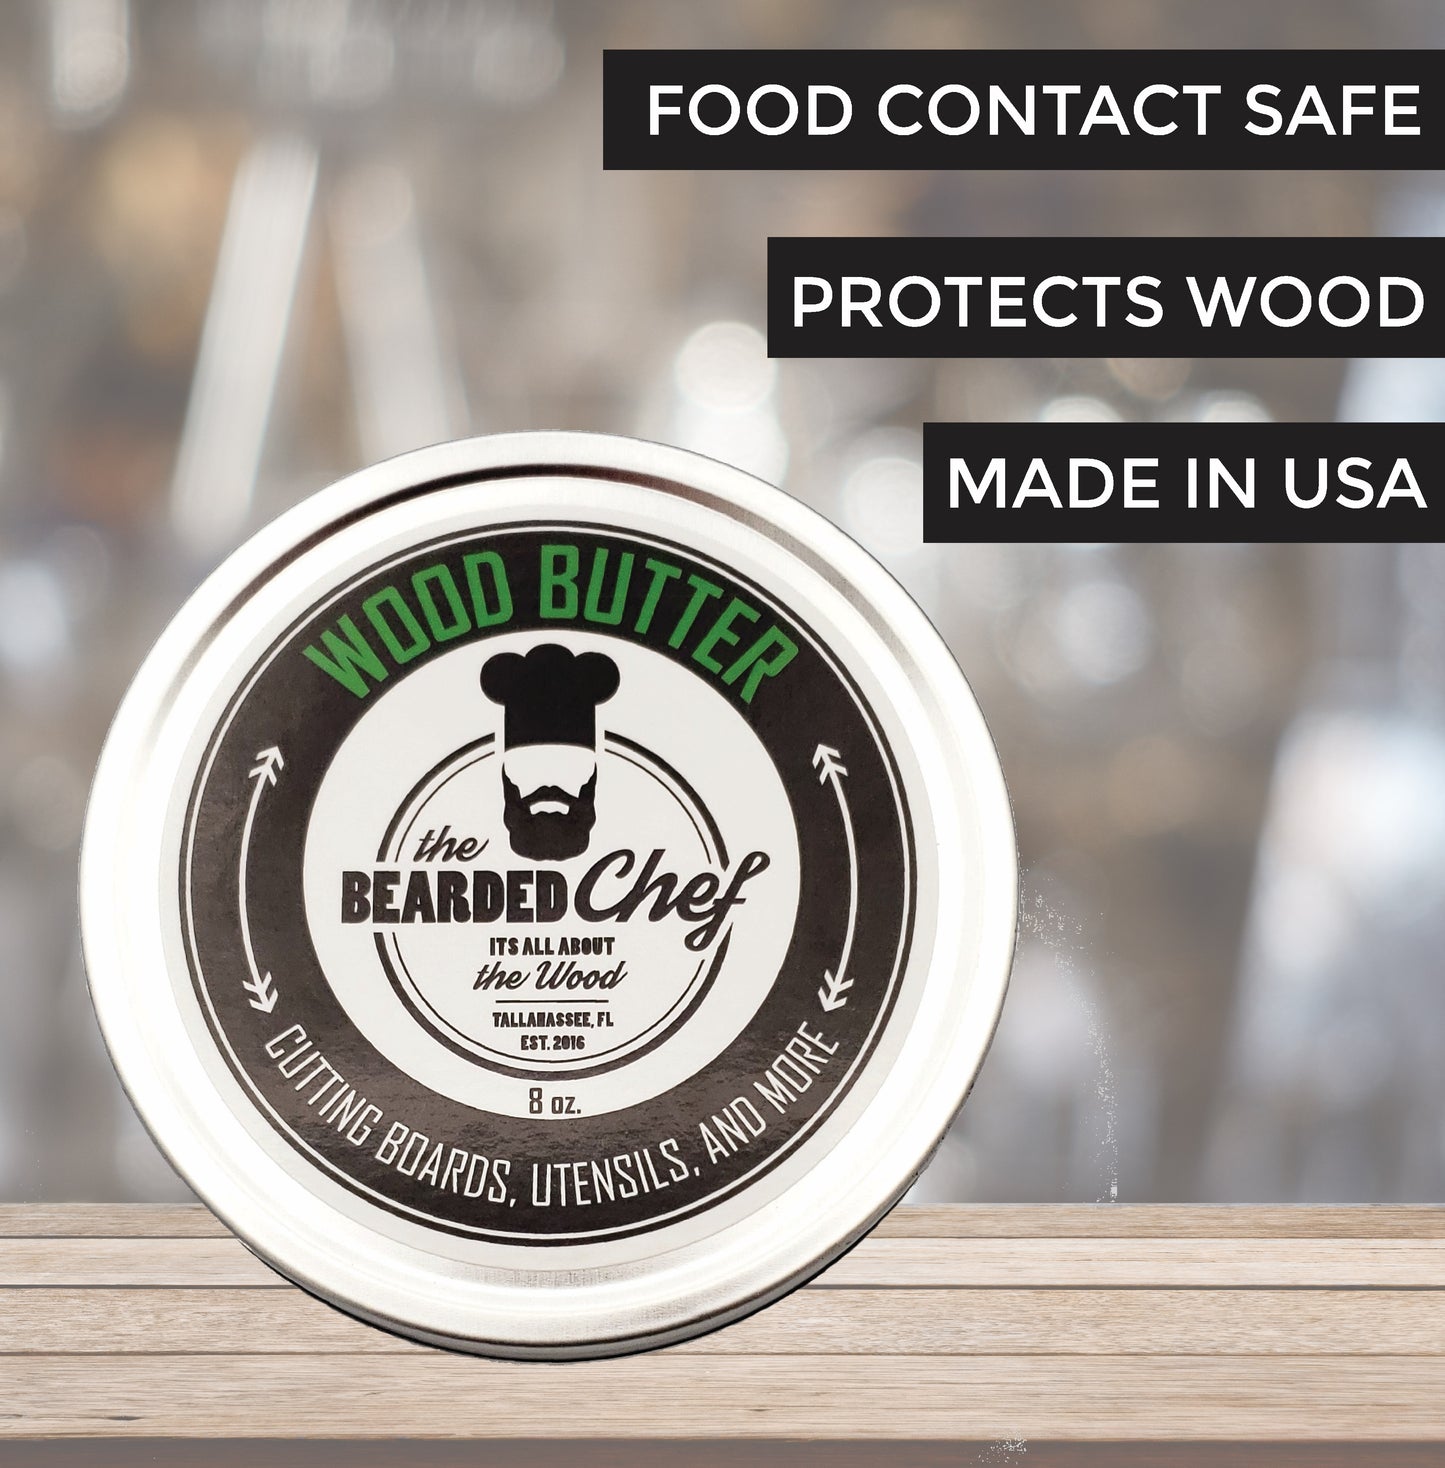 Wood Butter Protects and Conditions Cutting Boards, Butcher Blocks Made in the USA